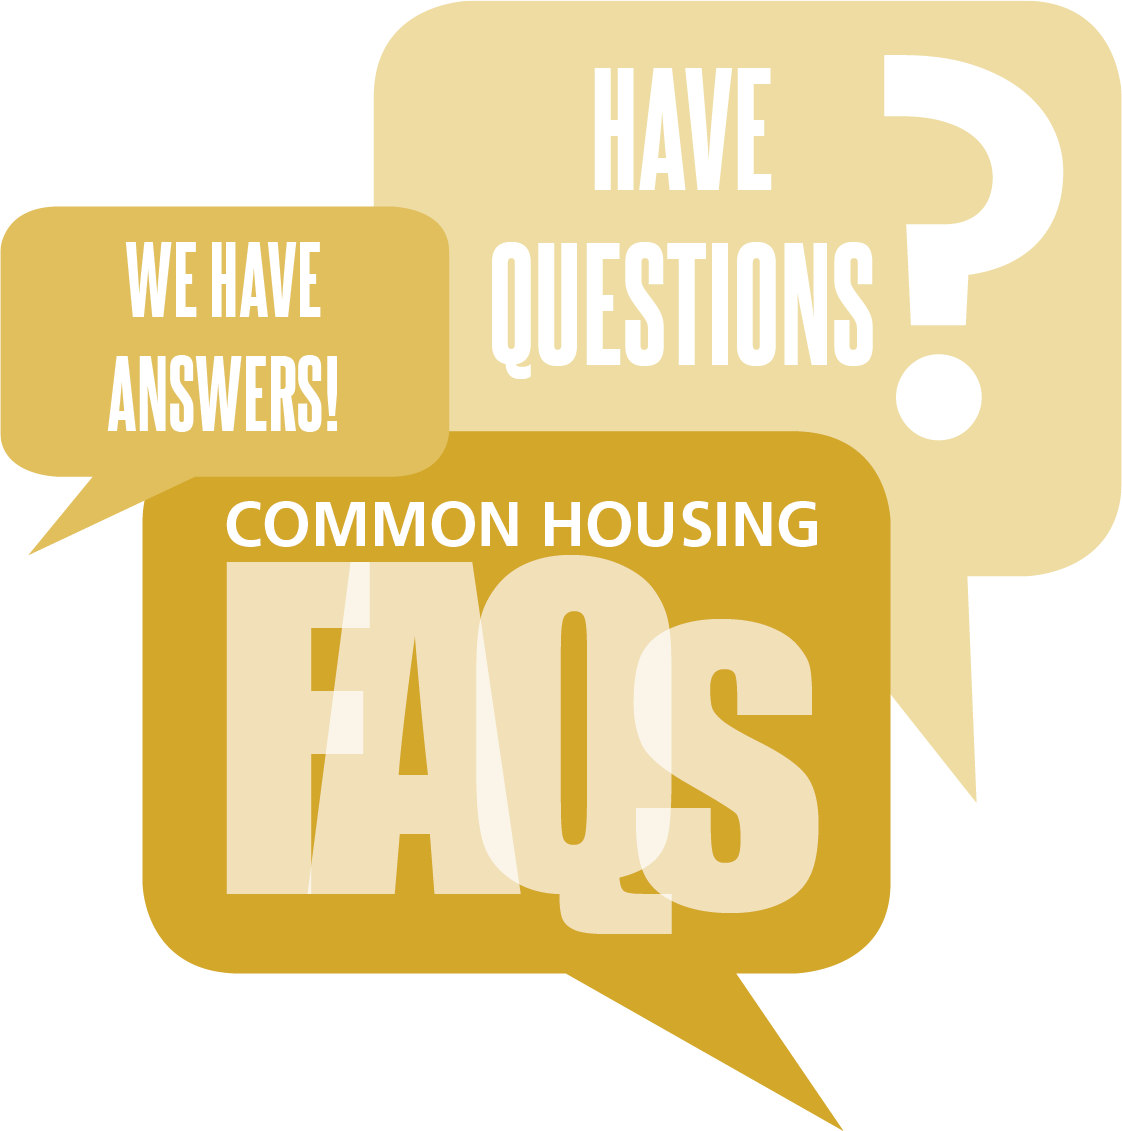 FAQs questions in yellow message box